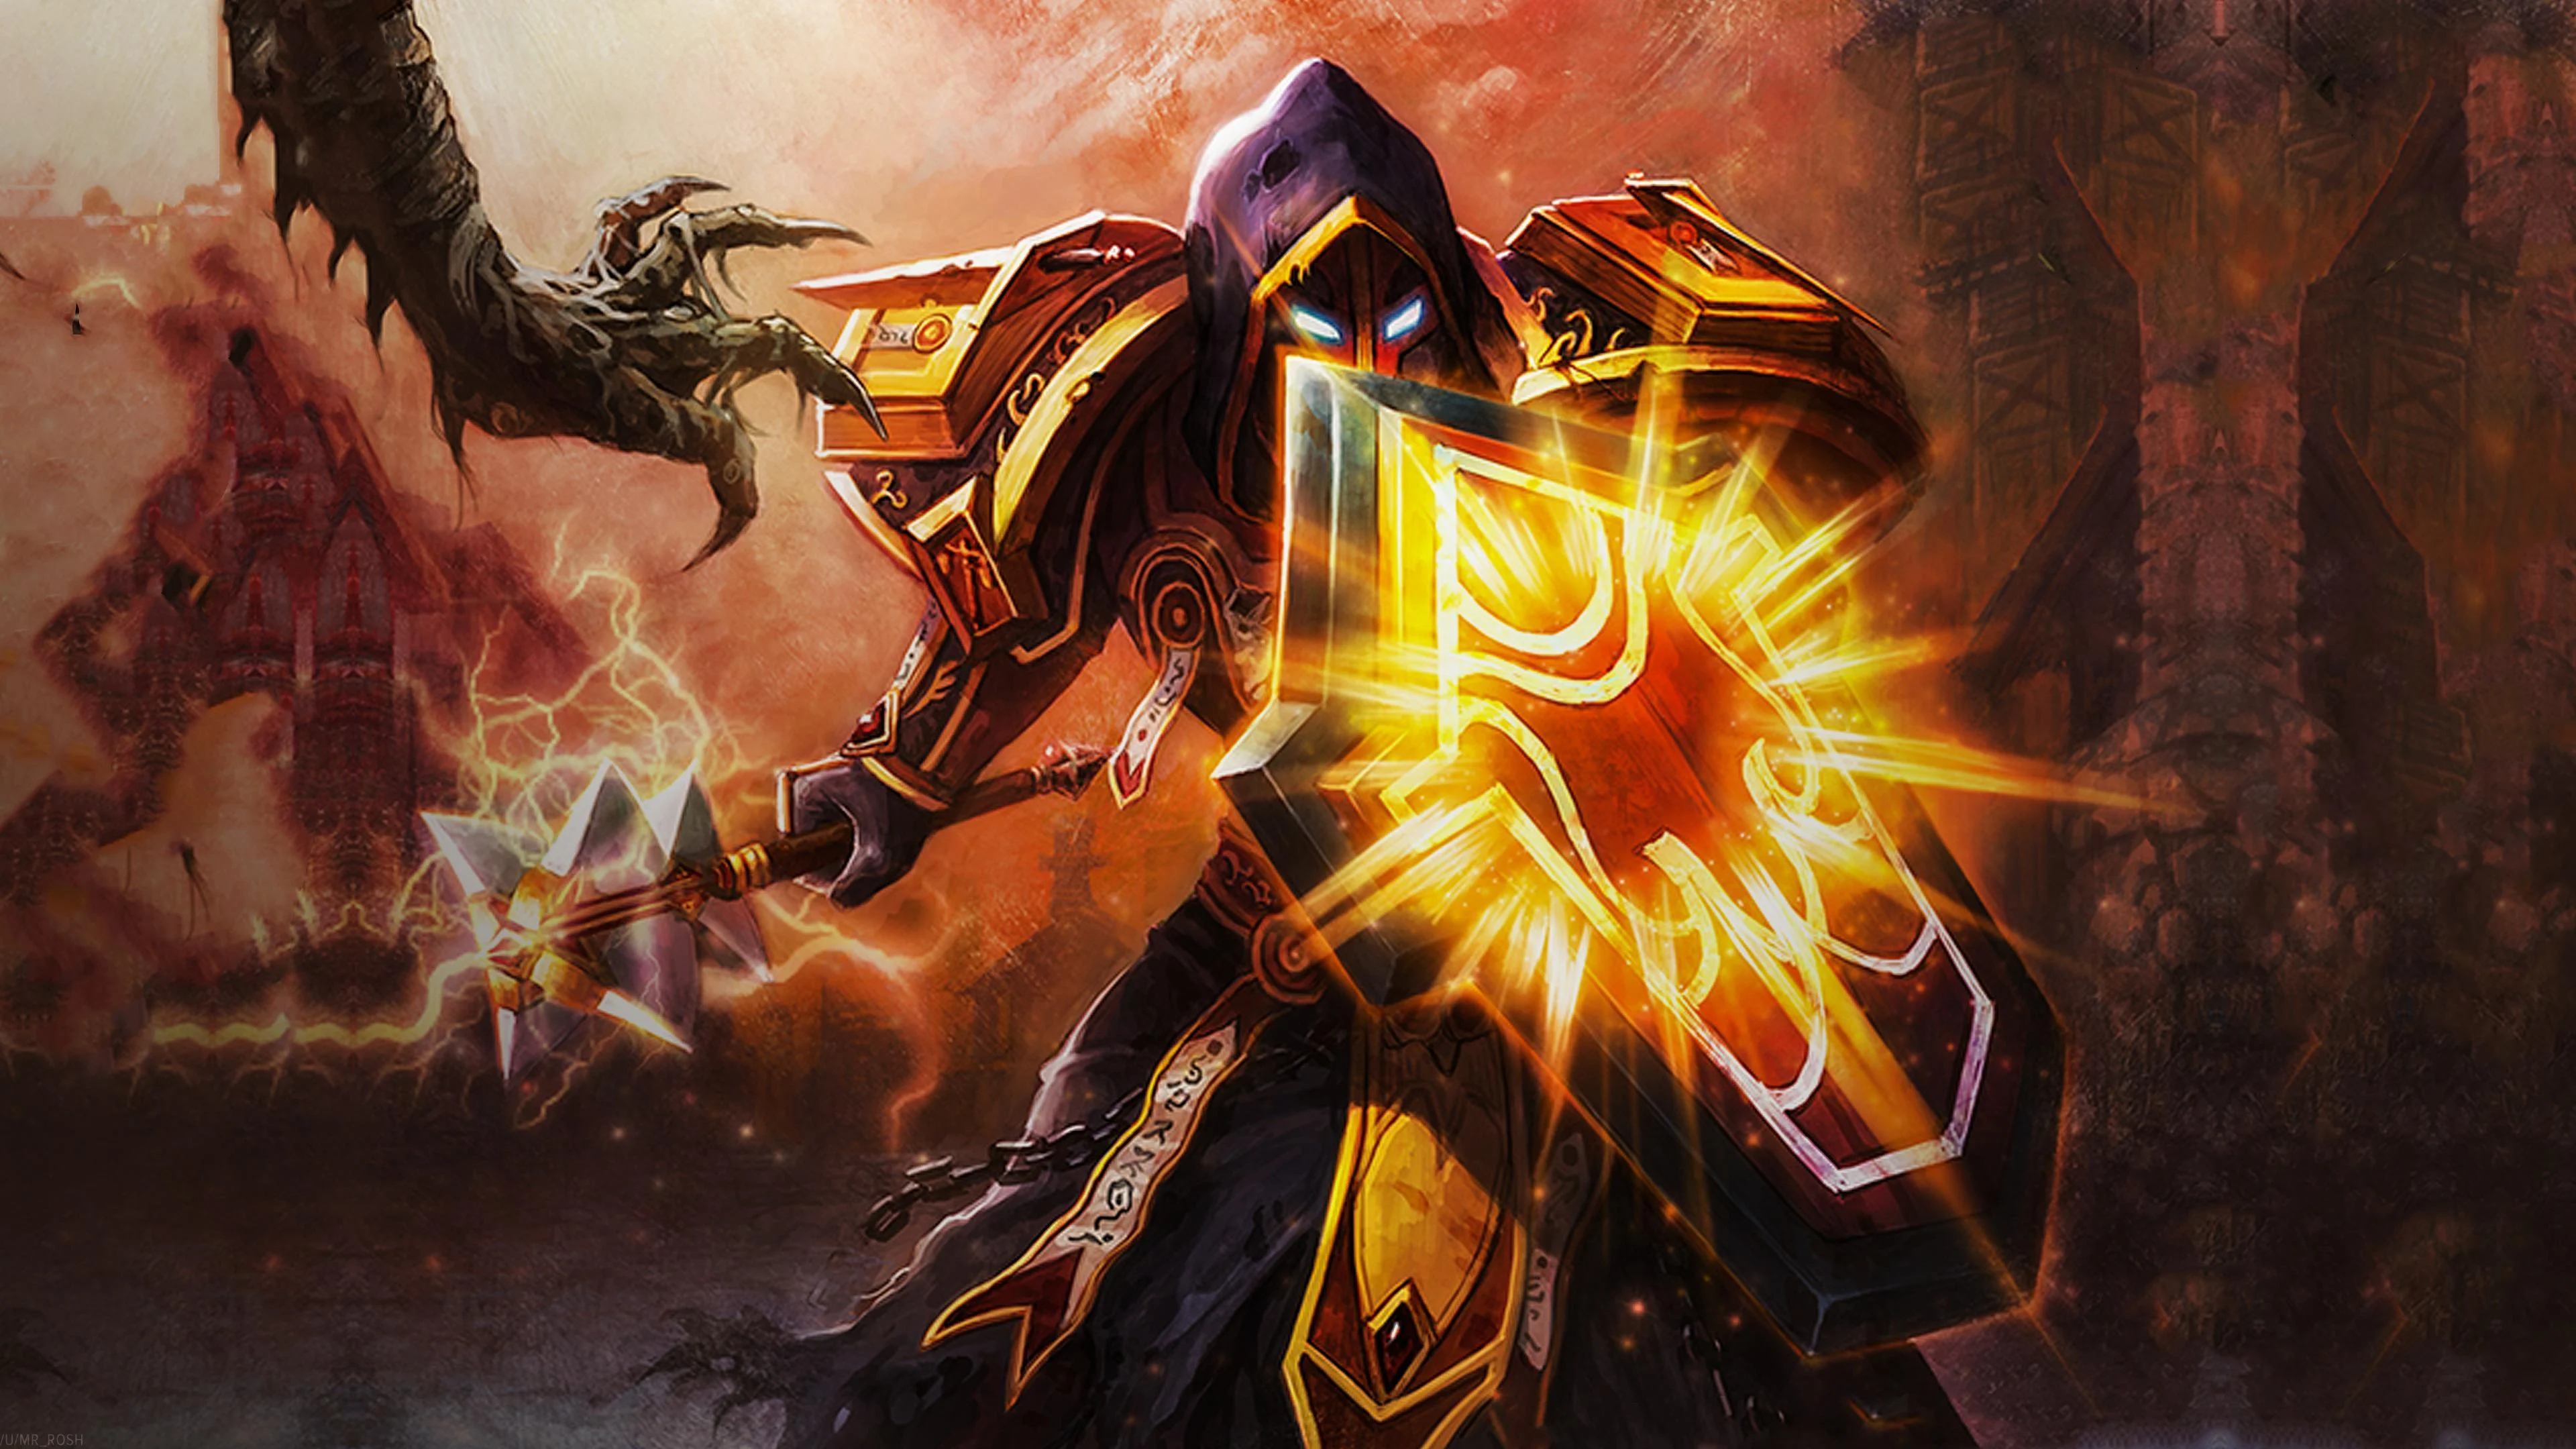 3840x2160 World of Warcraft Paladin Wallpapers Top Free World of Warcraft Paladin Backgrounds